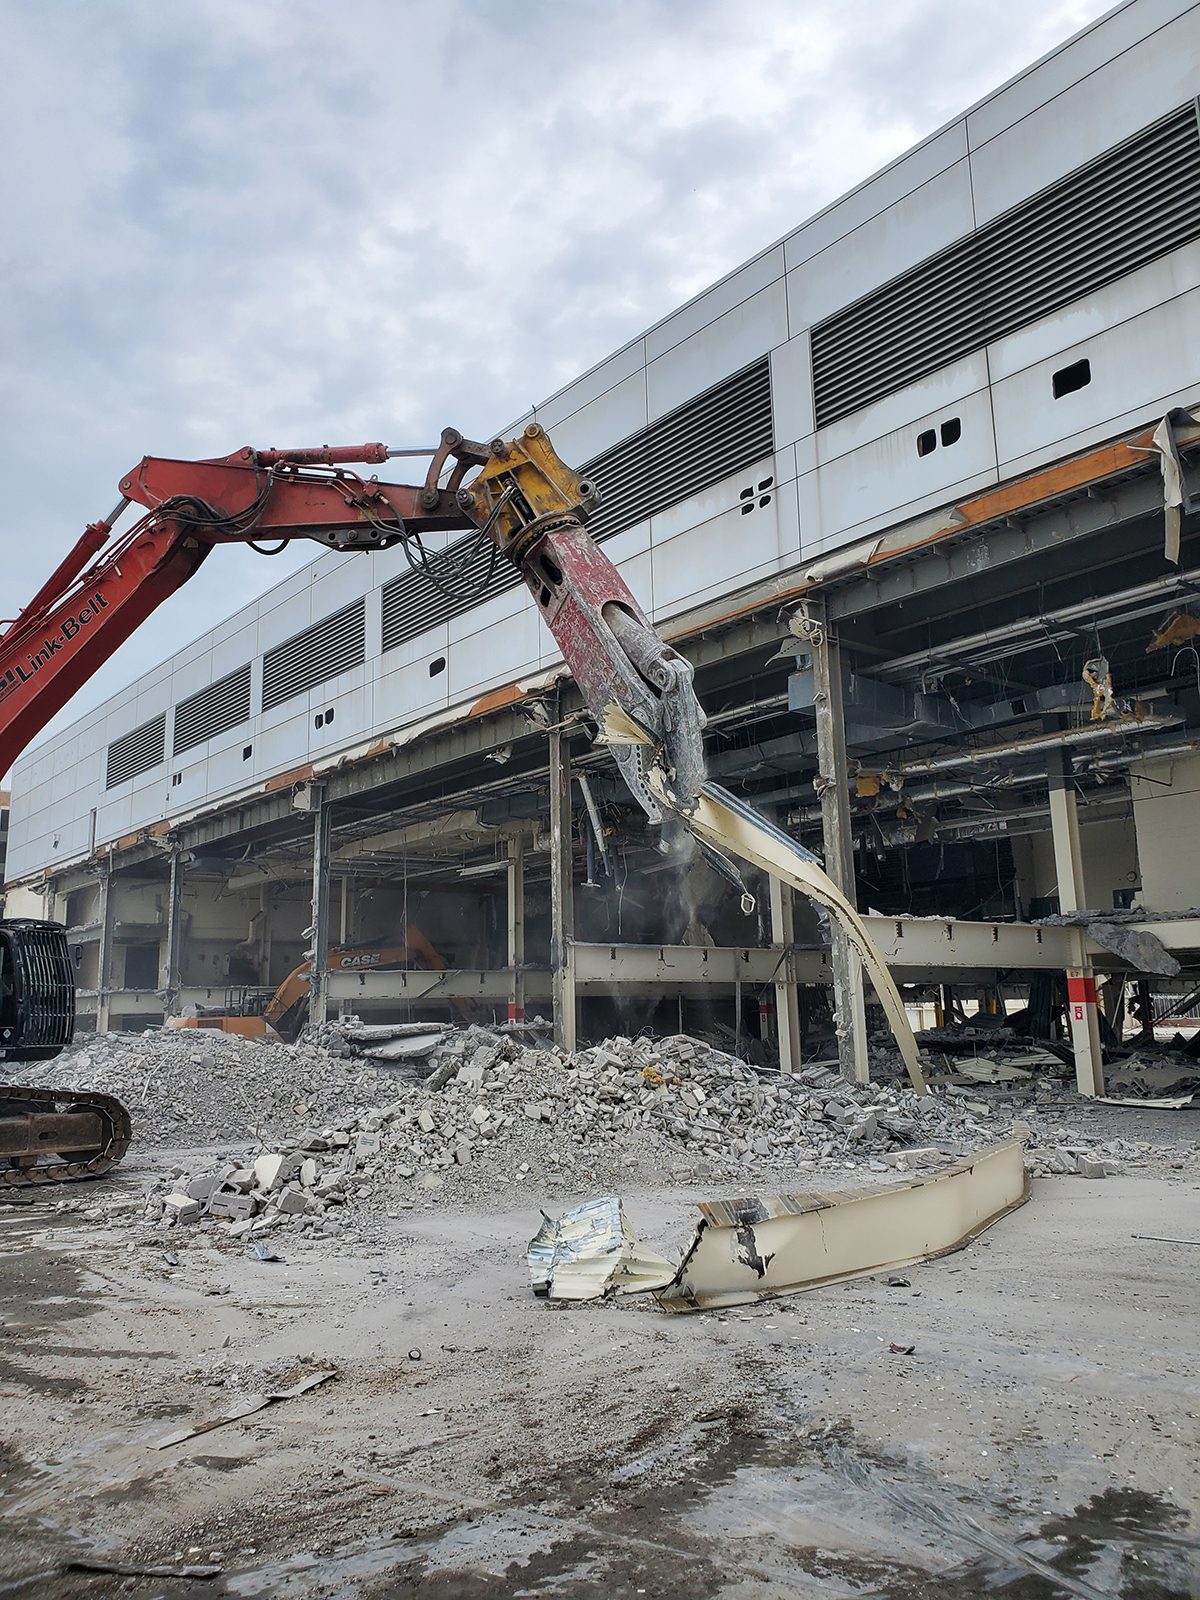 Metal shears attachment on excavator during building demolition